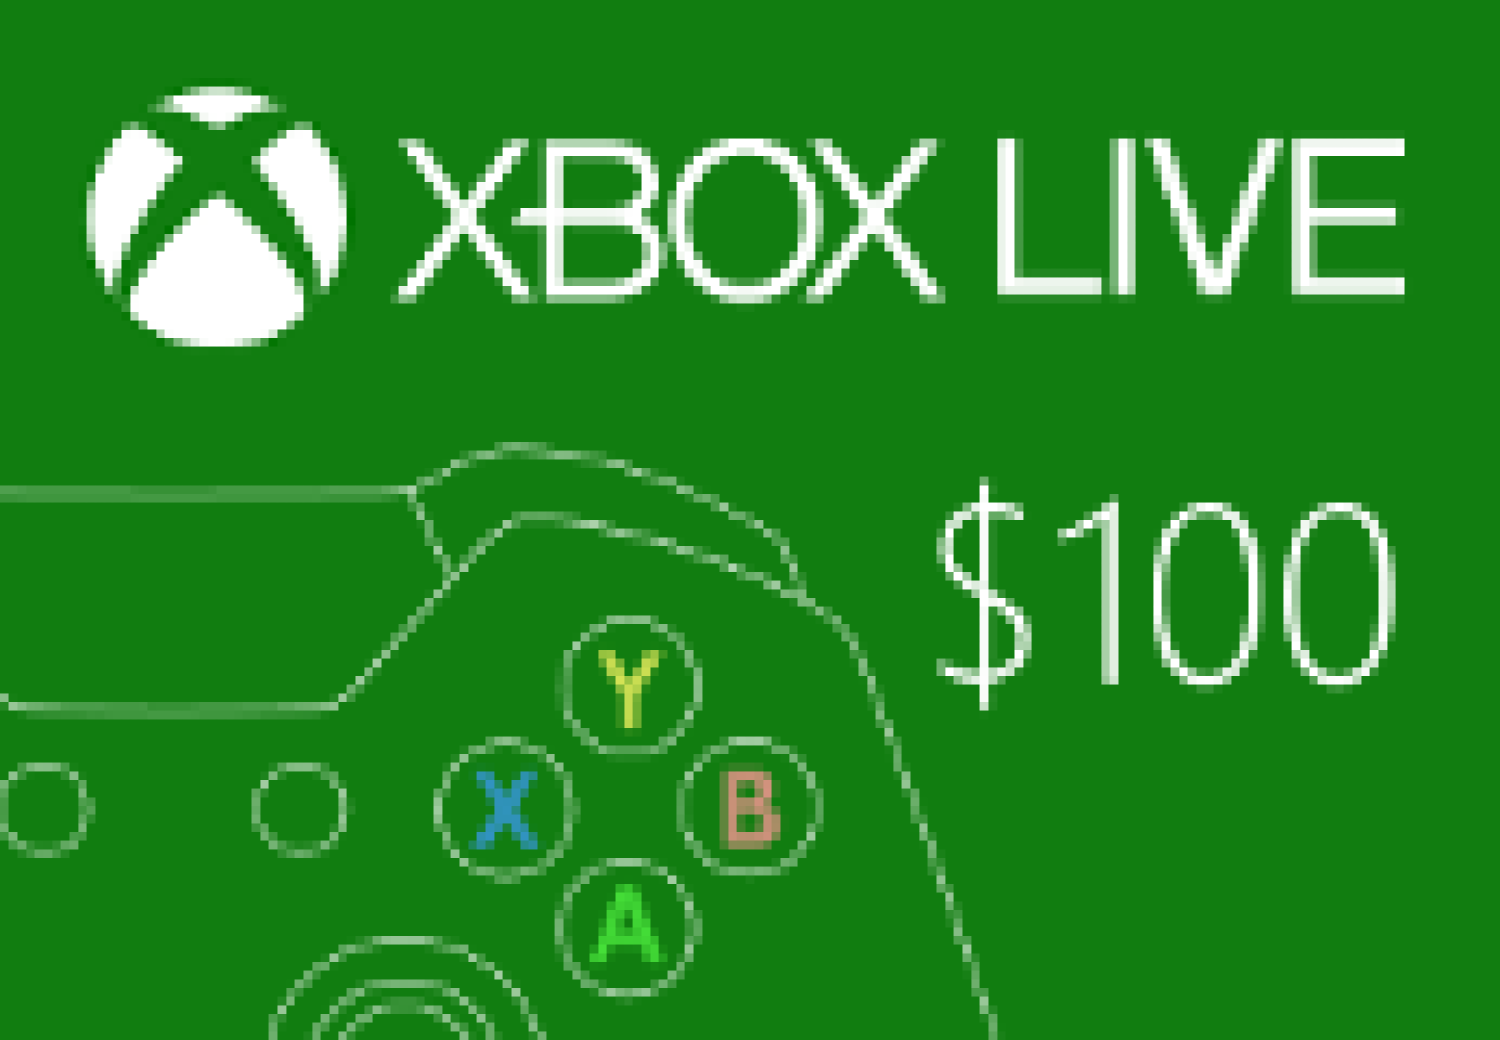 $100 Xbox Gift Card (Digital Delivery) $80